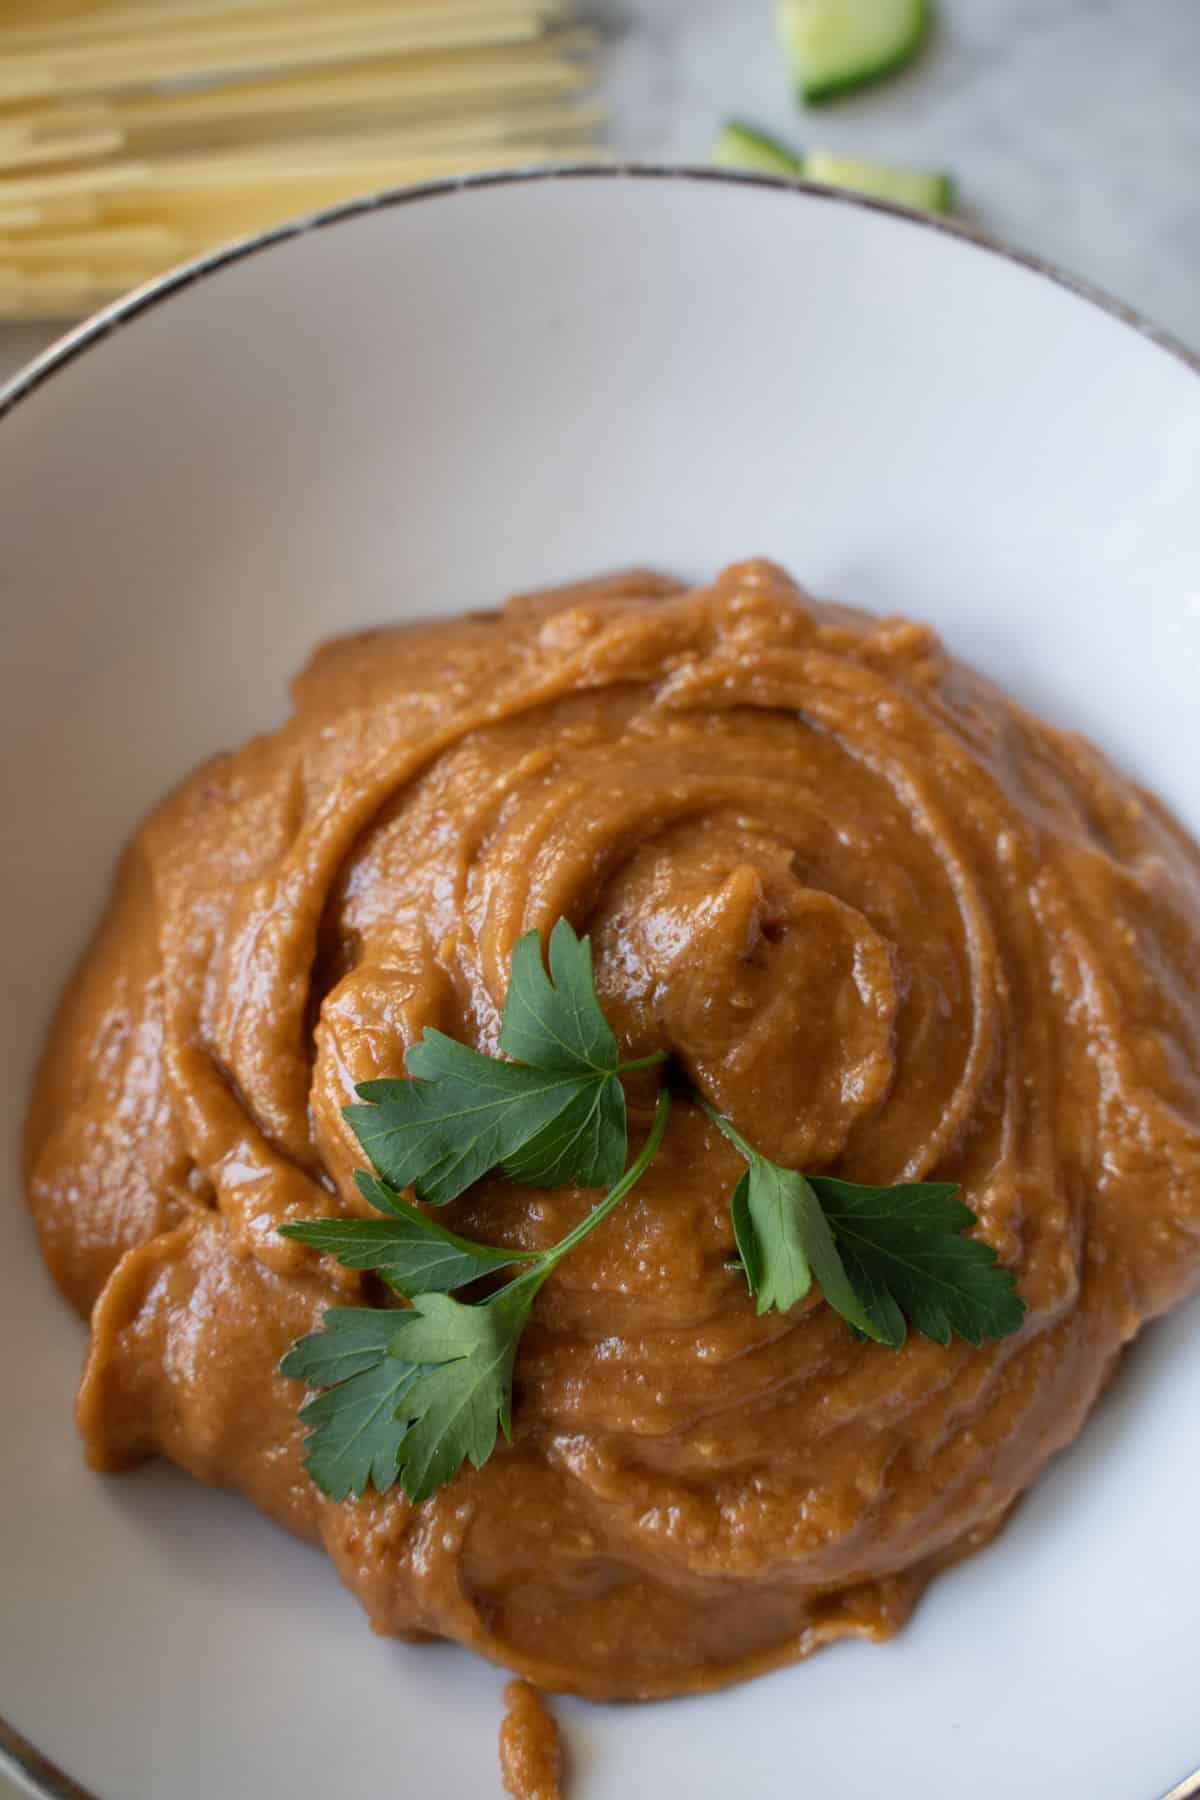 peanut sauce in a white bowl garnished with parsley